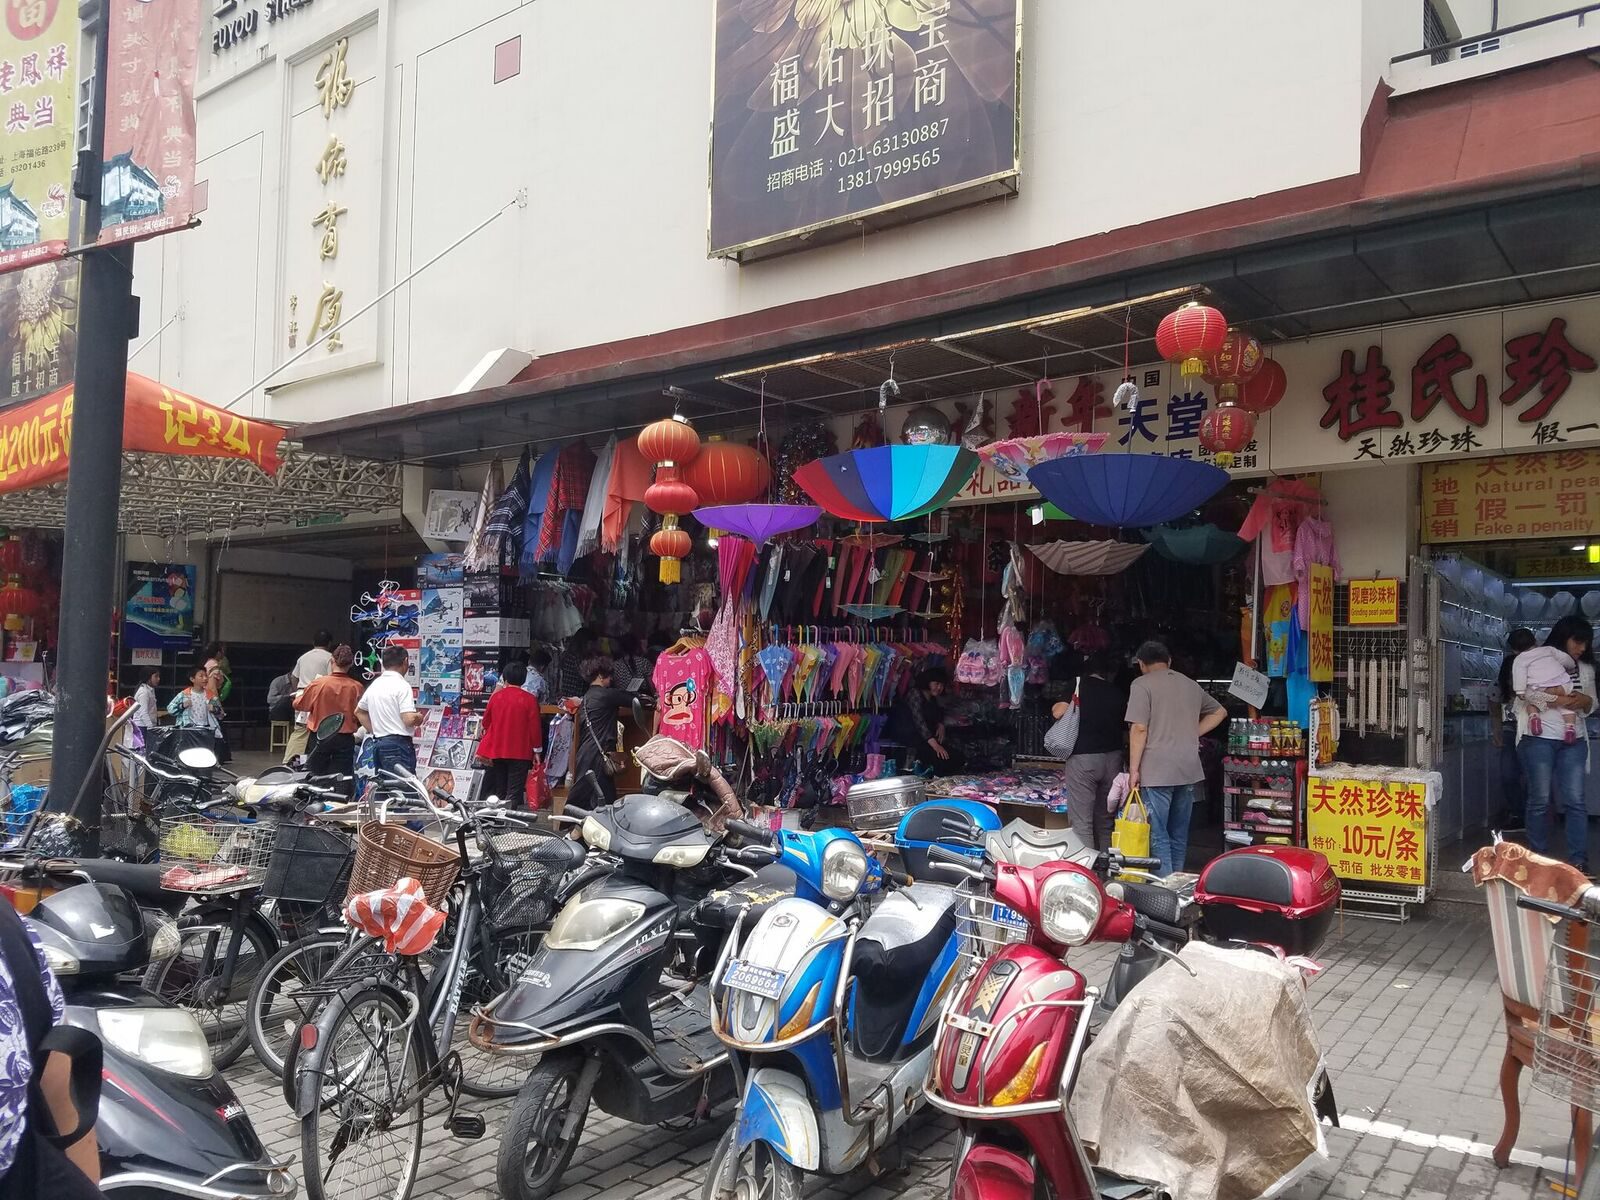 shopping and motor bikes in china